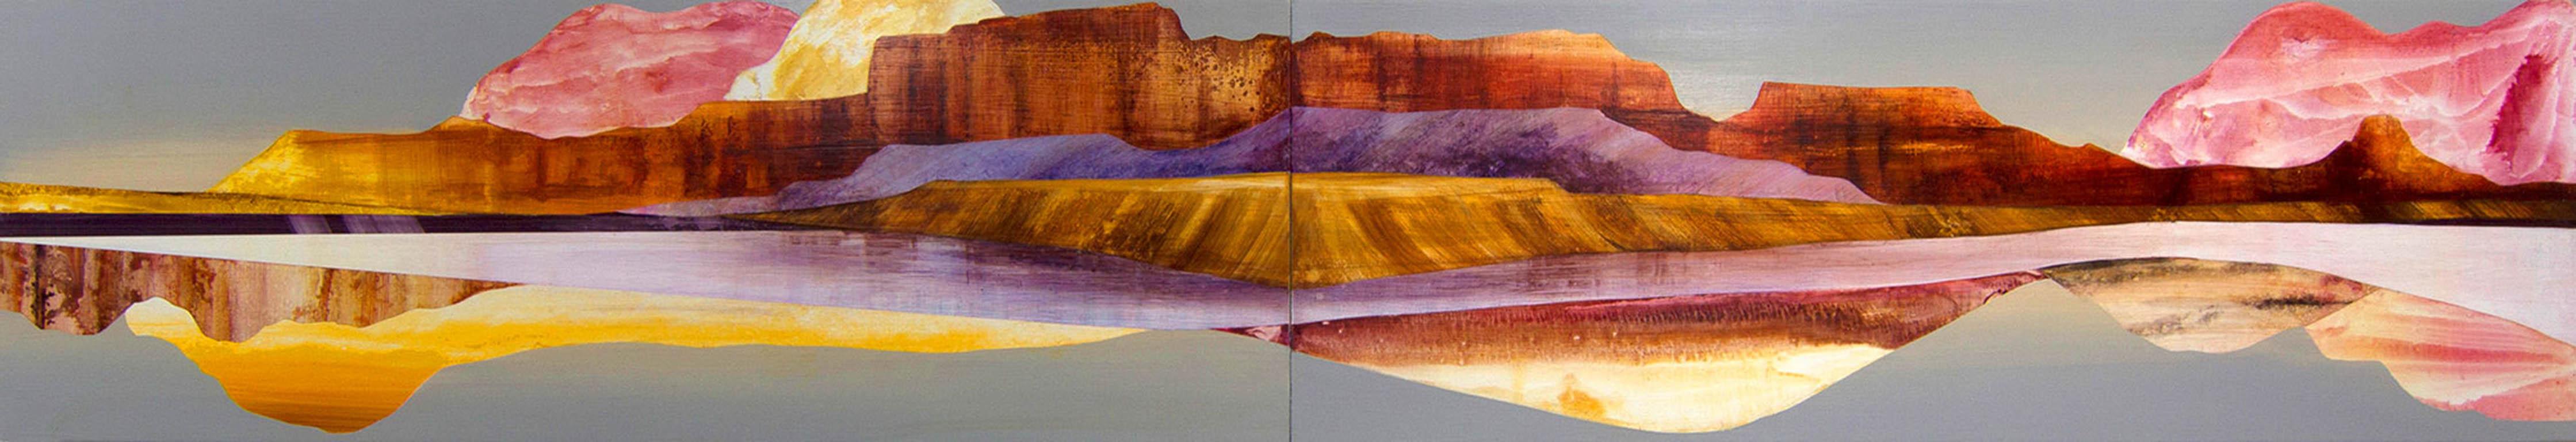 Sarah Winkler Landscape Painting - Where Canyons Reflect Time, Pink Skies Float on Rivers Wide